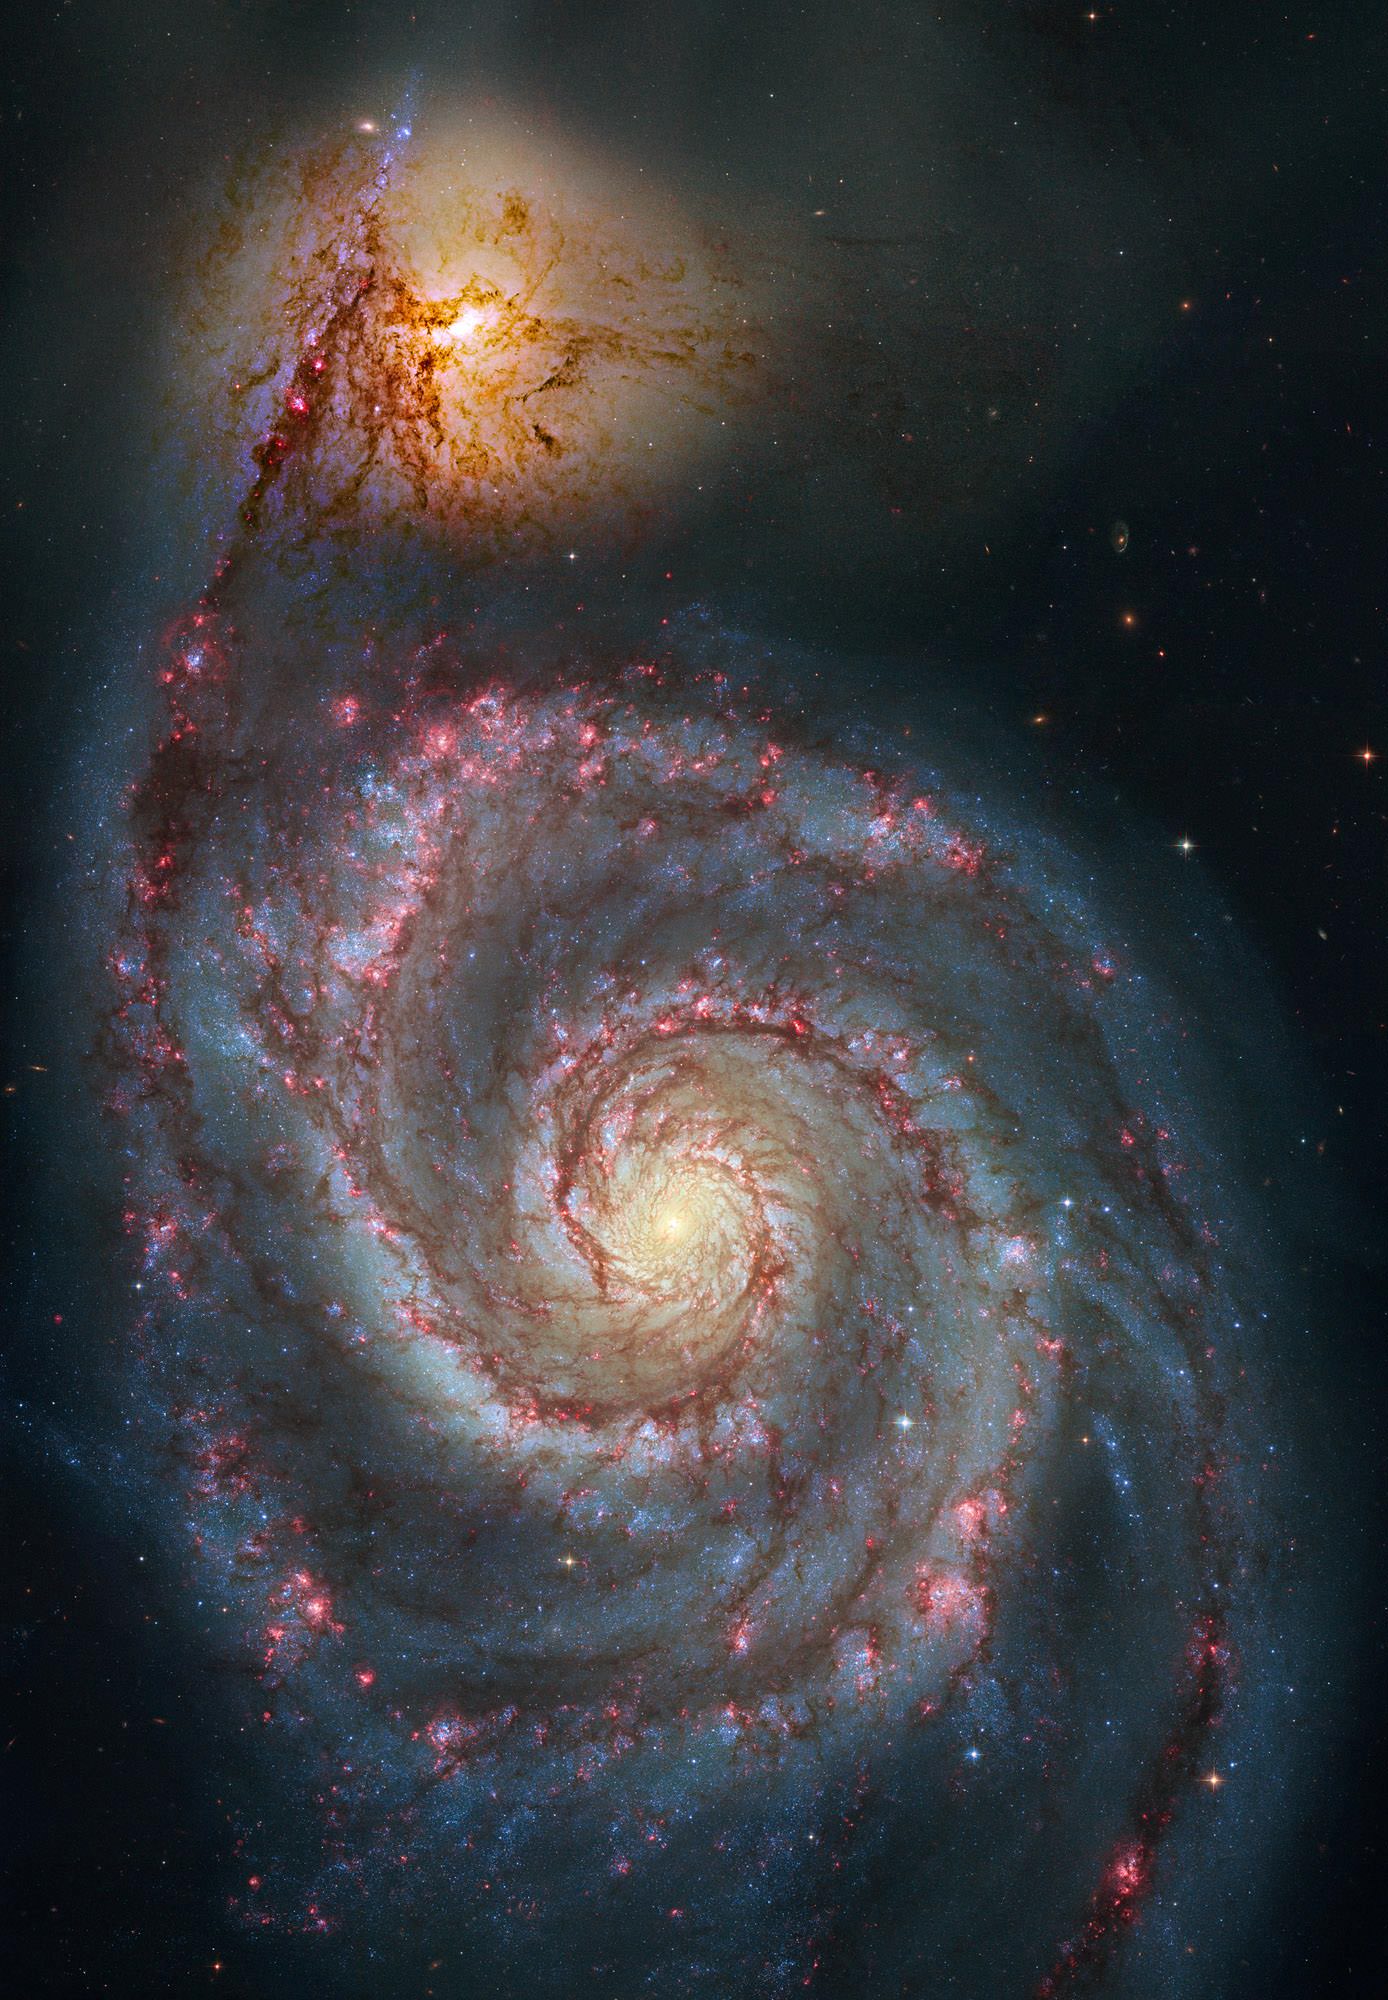 Supernova Discovered in M51 The Whirlpool Galaxy - Universe Today